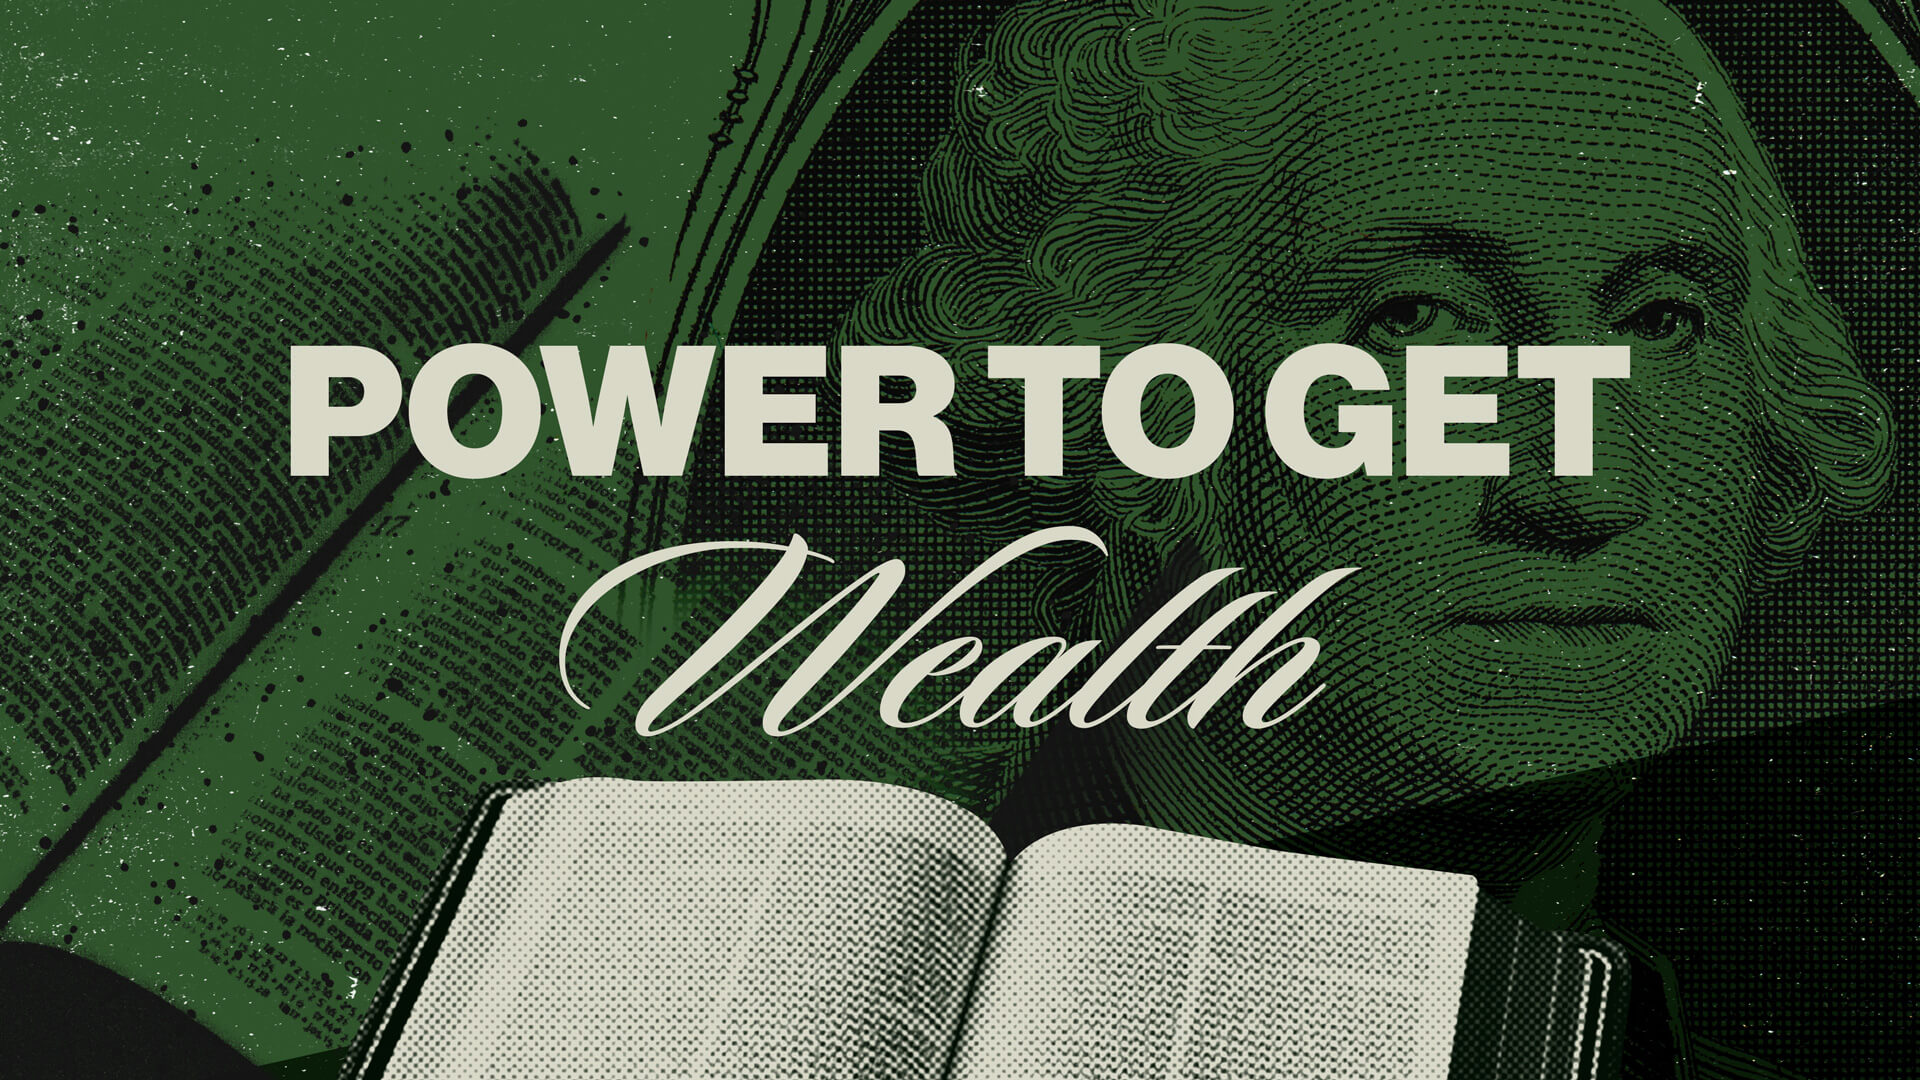 power to get wealth